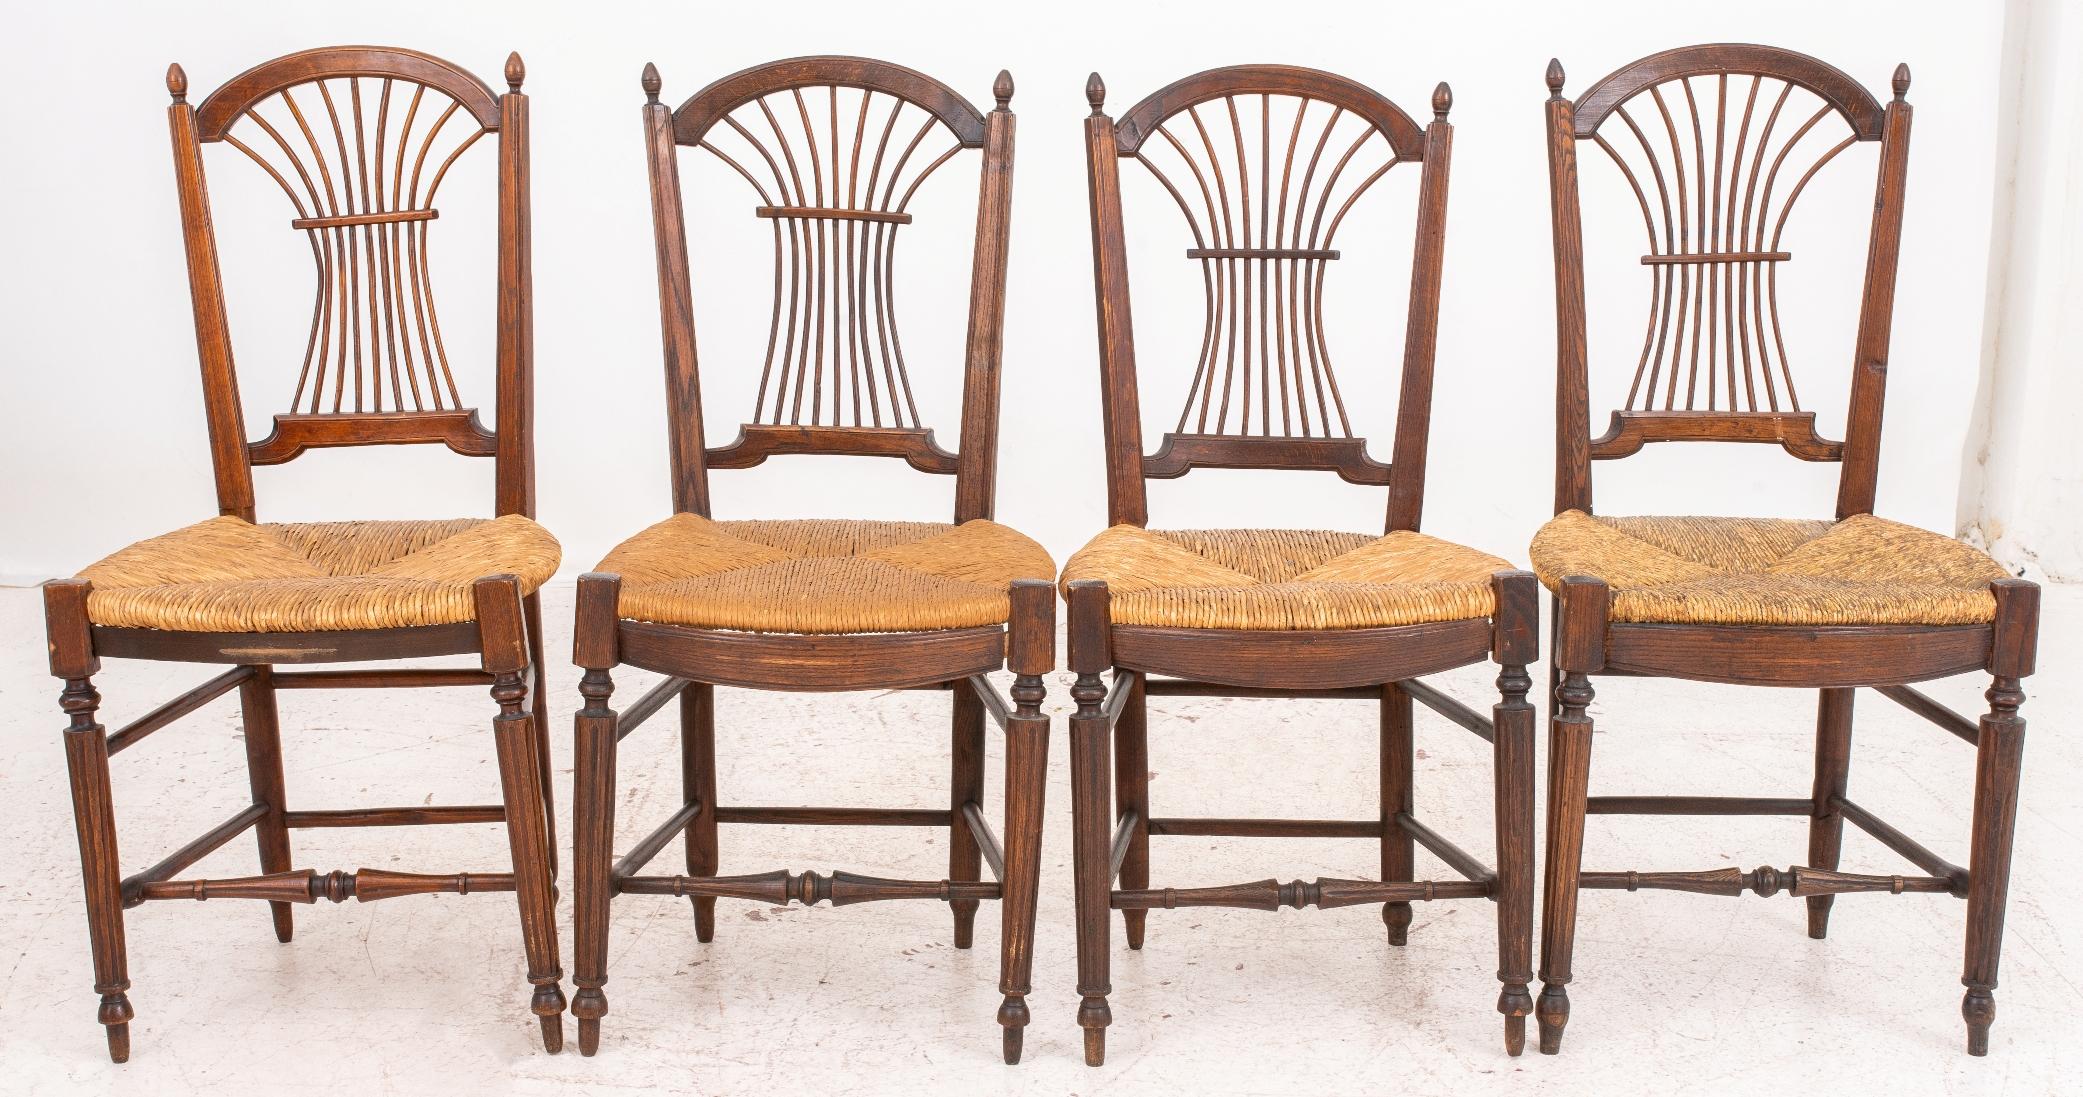 French provincial rush-seated side chairs, 19th century or later, with arched crest rails, finials, and bent-spindle 